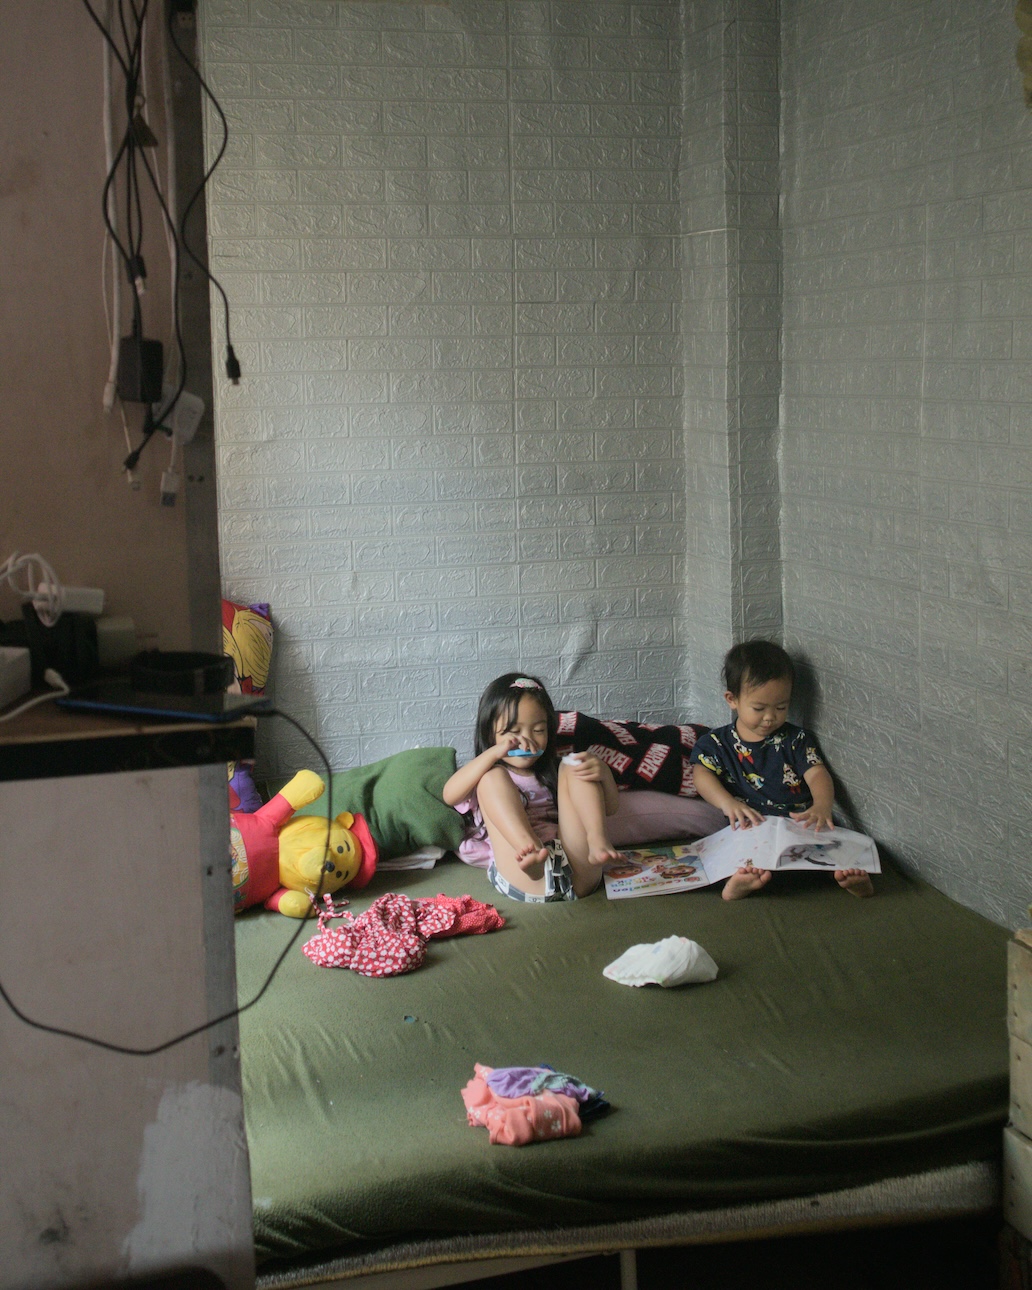 Two children reading books while on bed